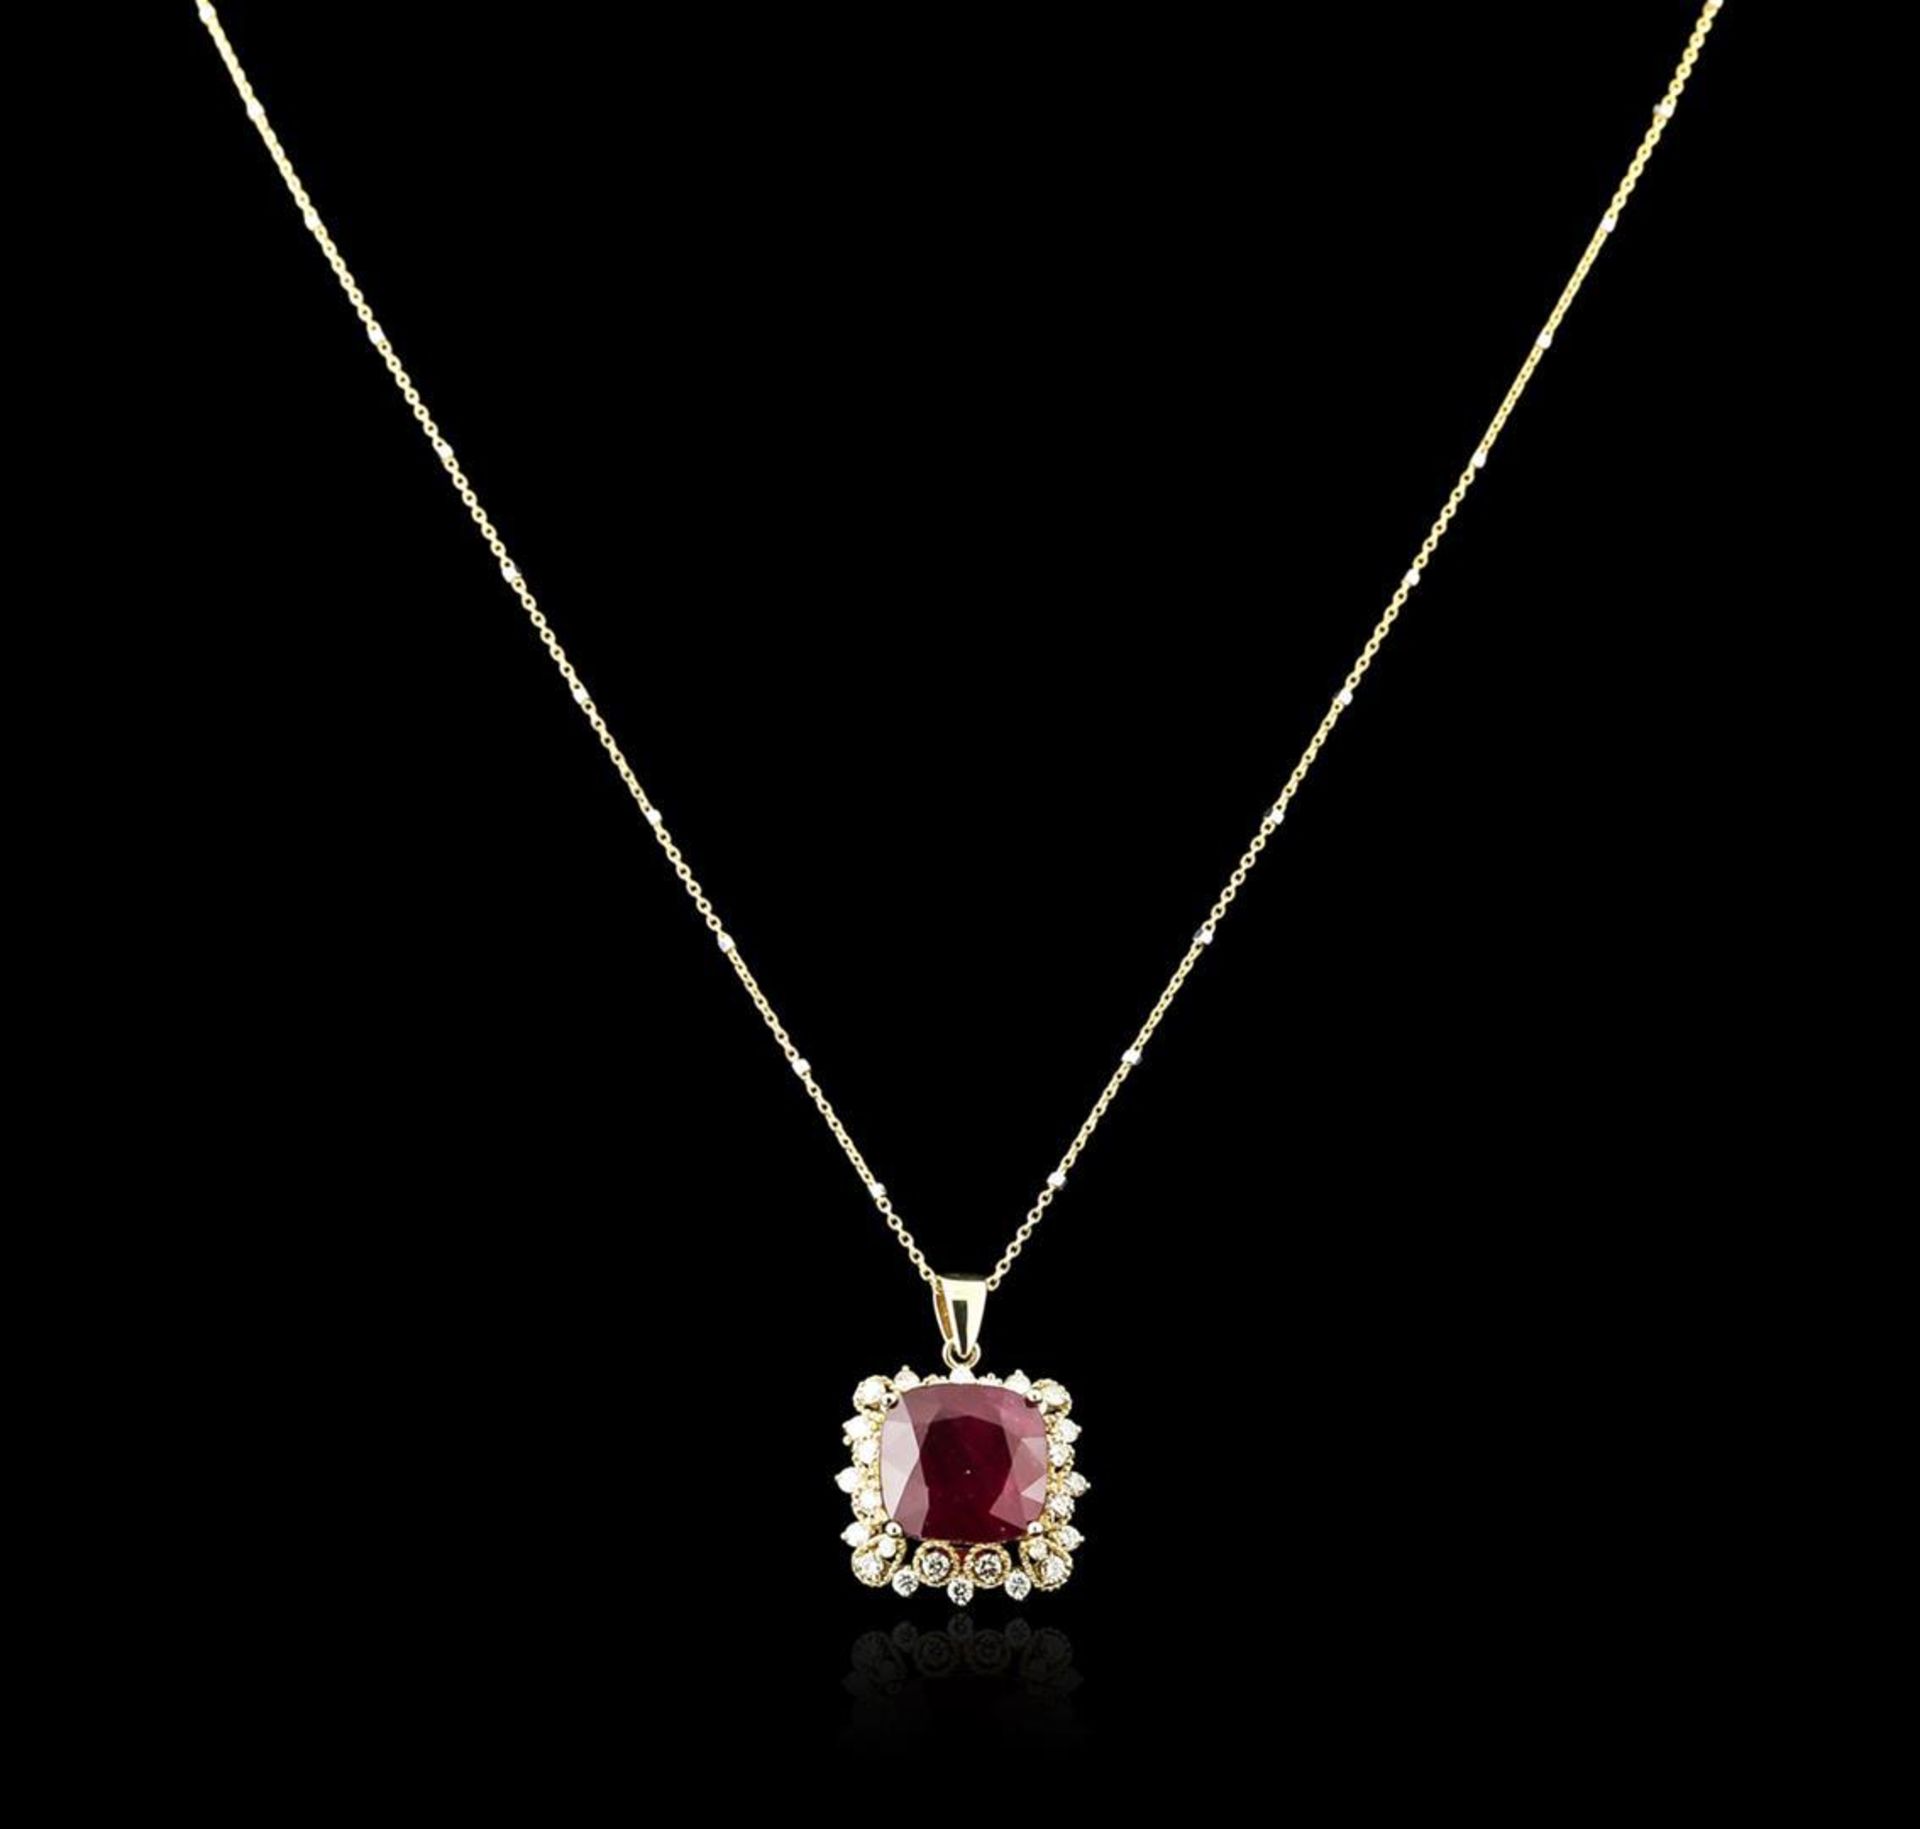 14KT Yellow Gold 9.97 ctw Ruby and Diamond Pendant With Chain - Image 2 of 3